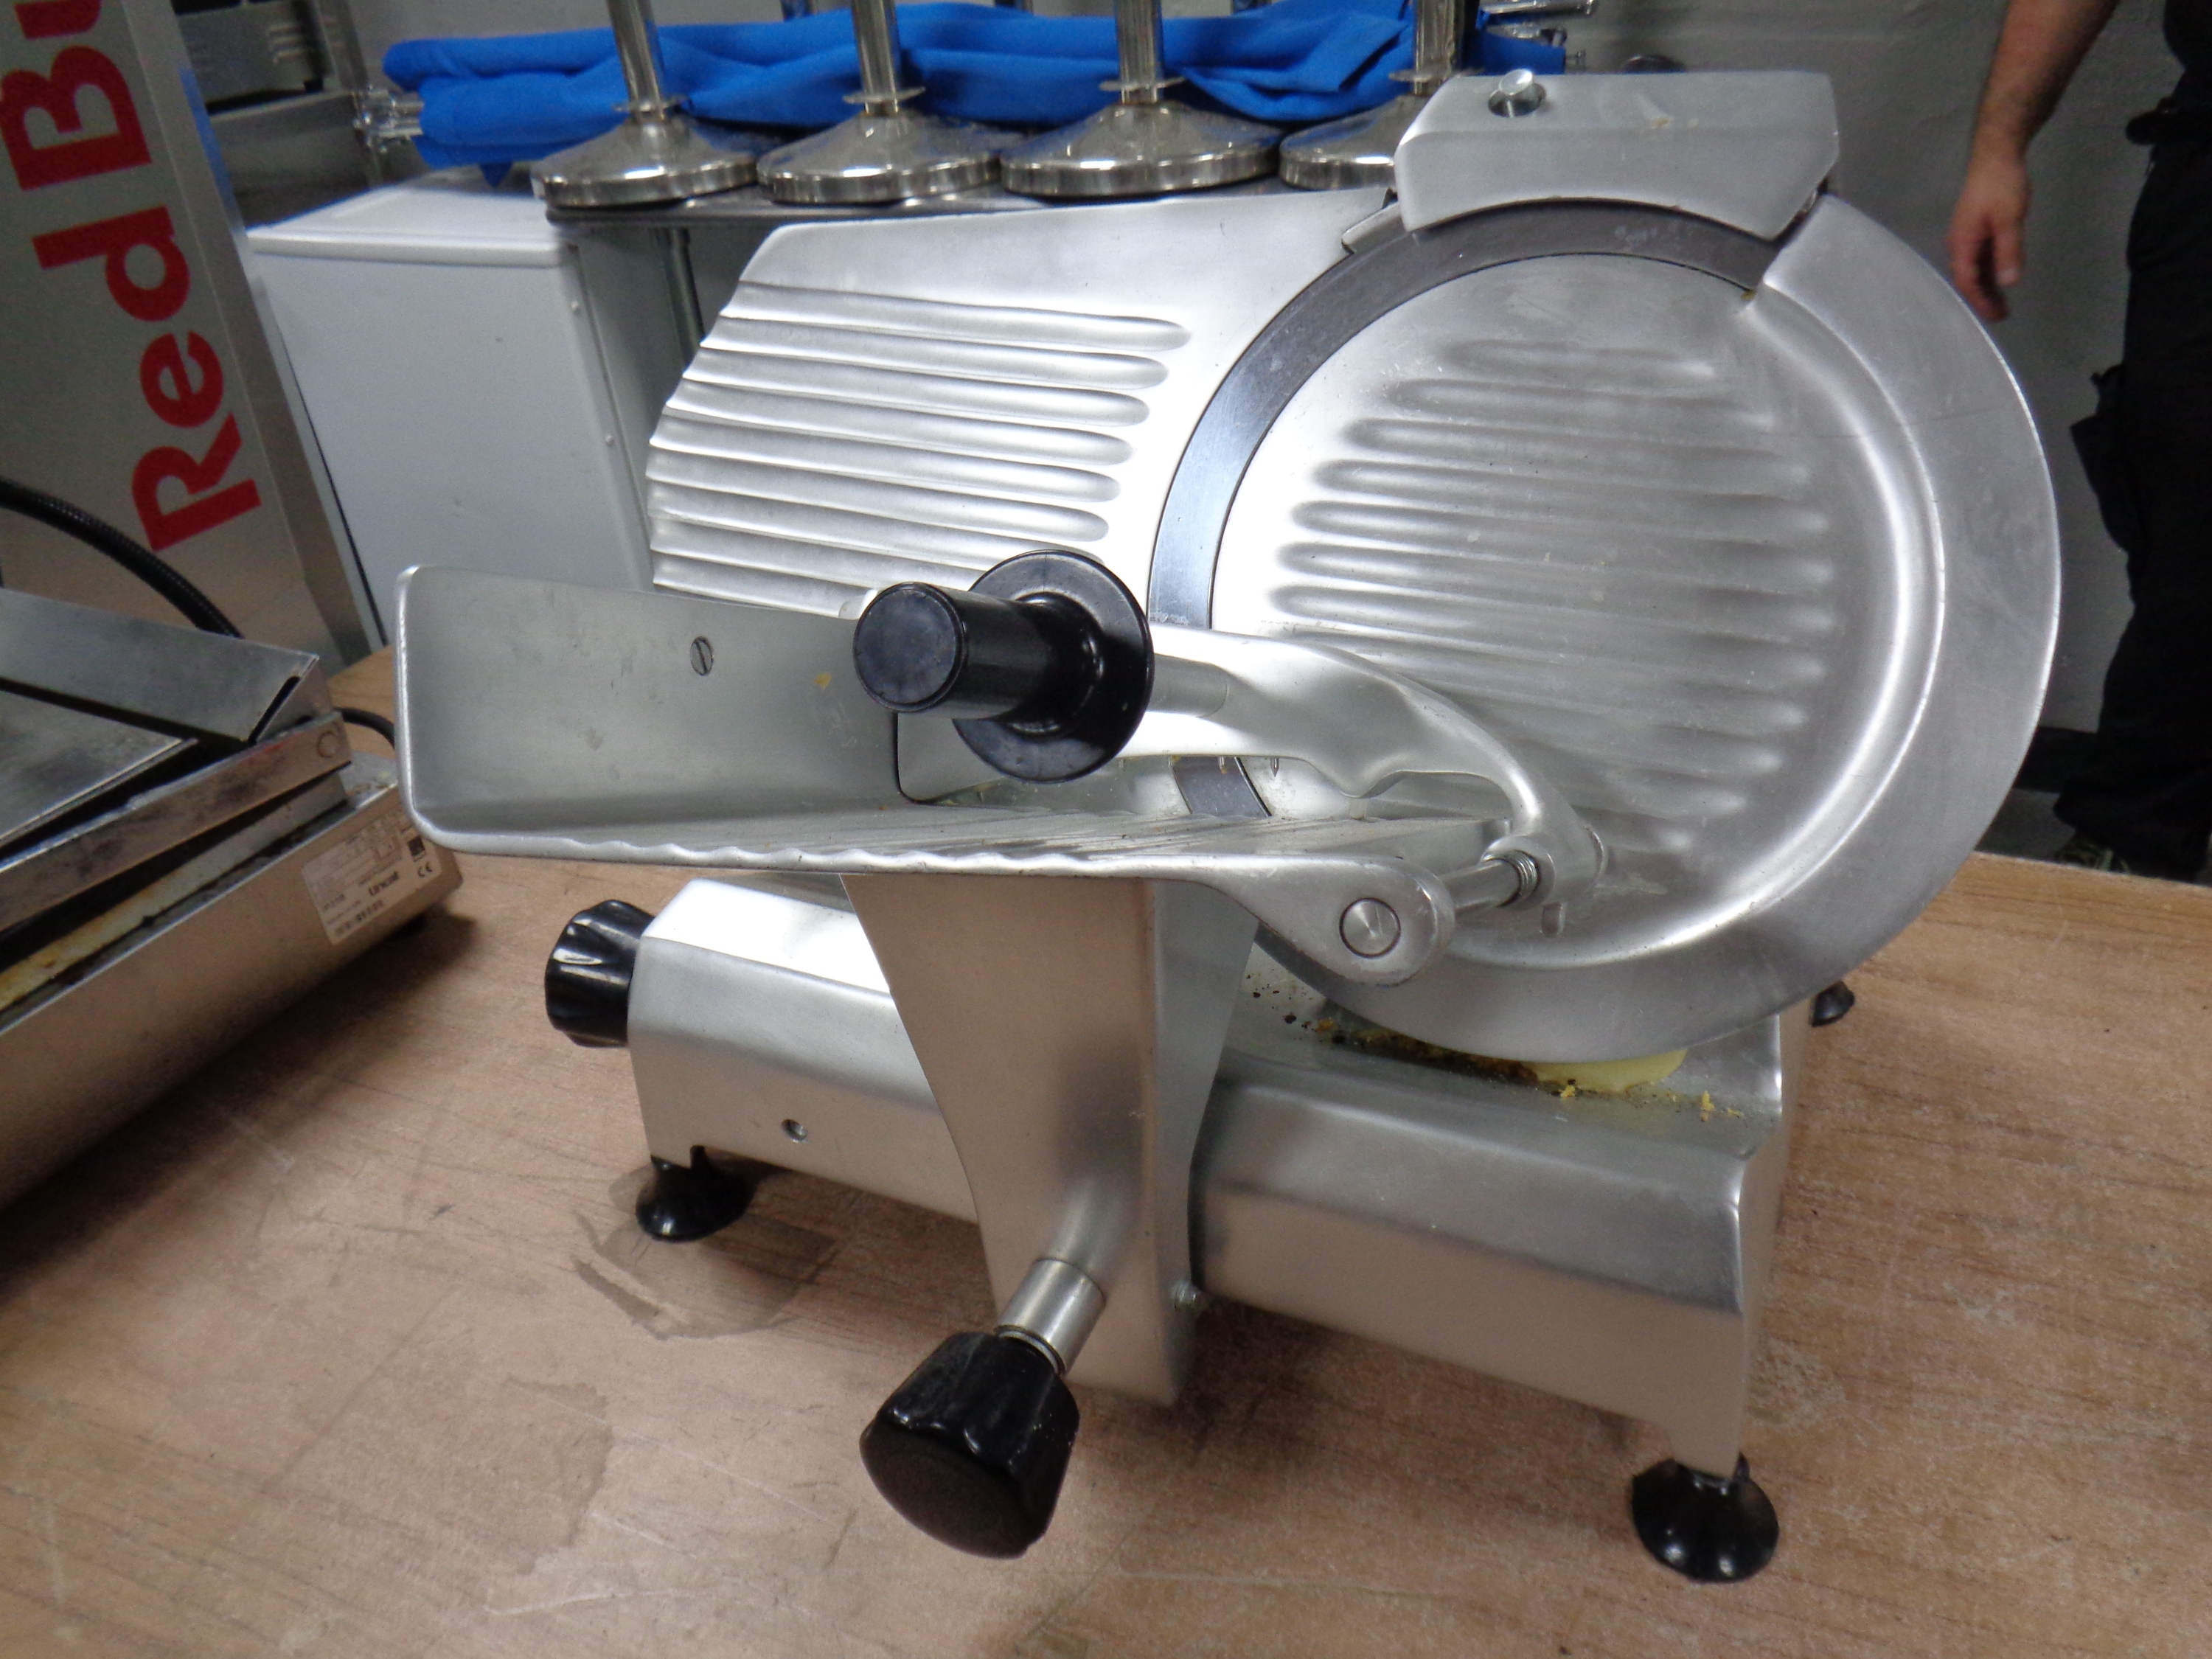 A stainless steel meat slicer